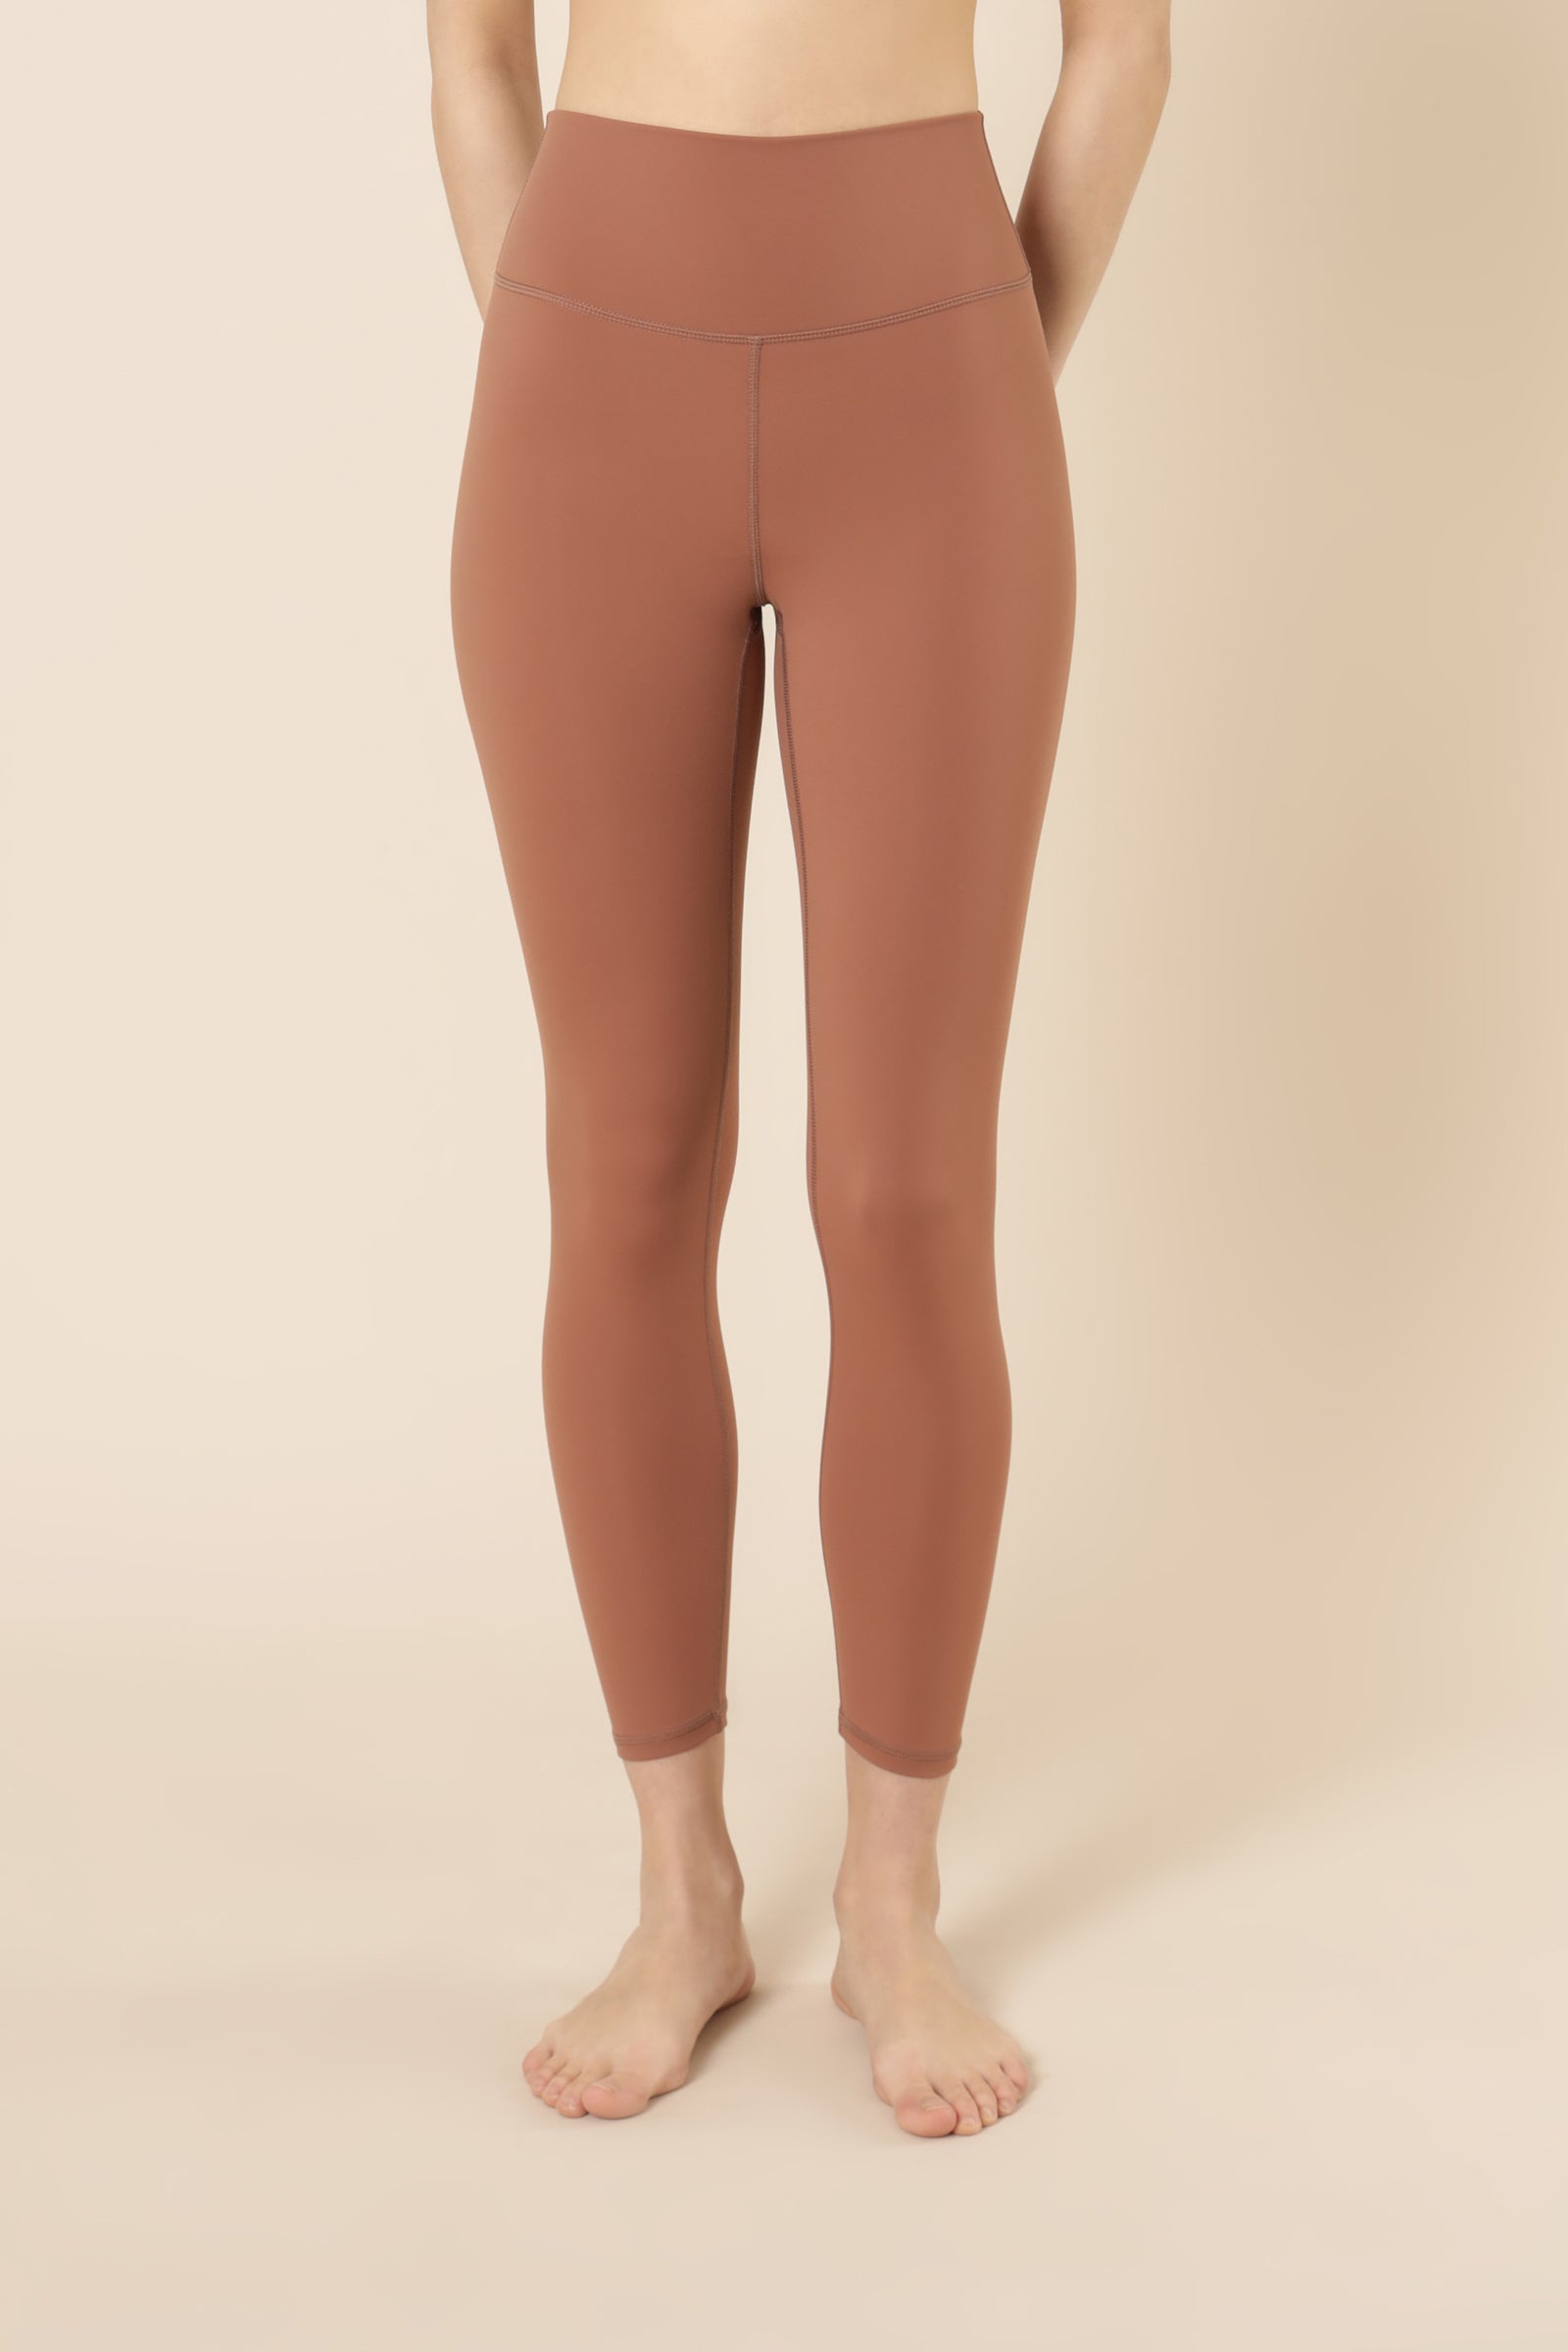 Nude Lucy nude active 7 8 tights rosewood pants